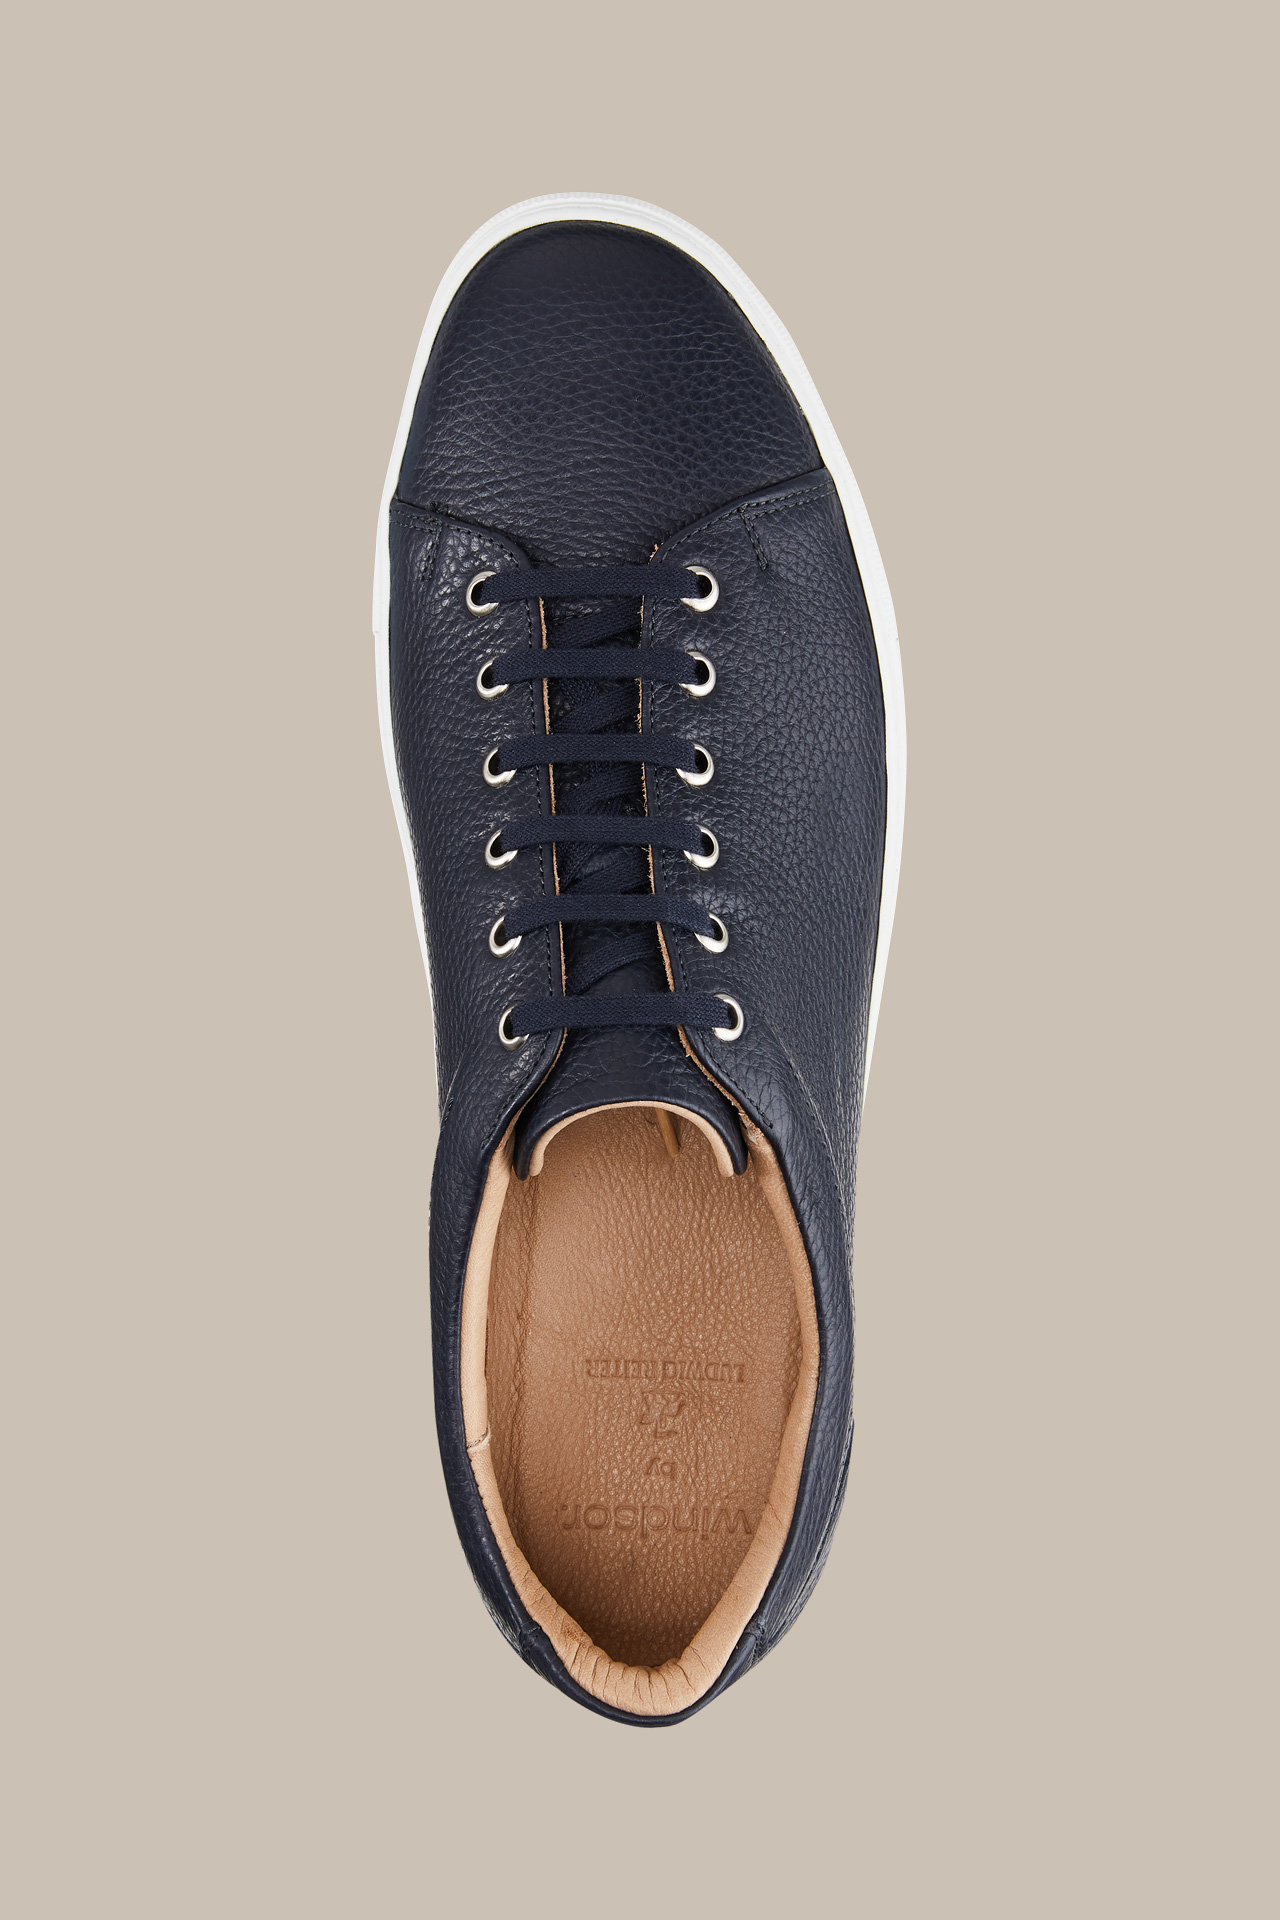 Flat Tennis Trainers by Ludwig Reiter in navy, unisex